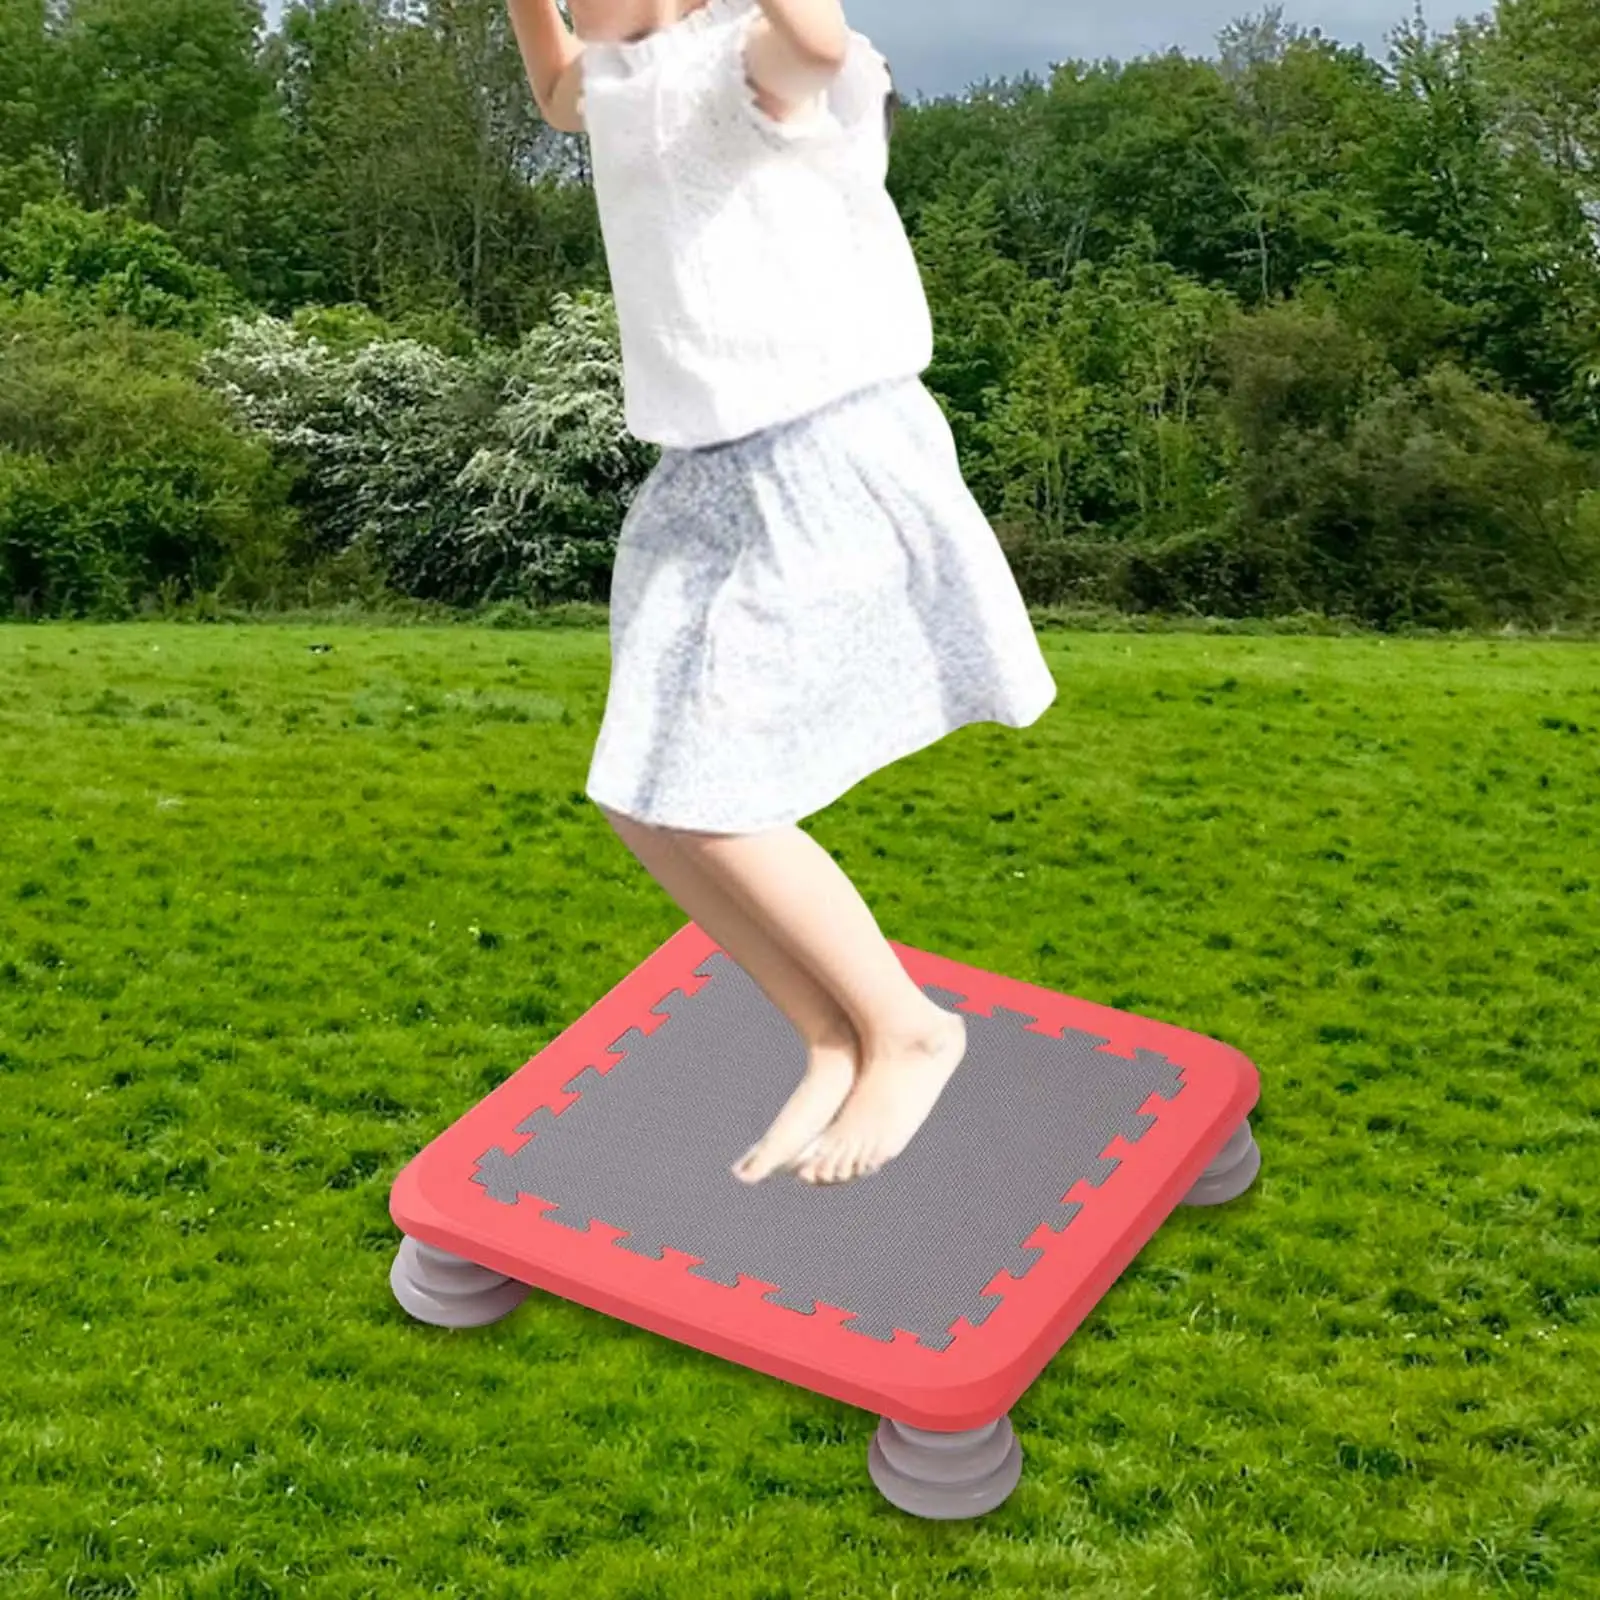 Mini Kids Trampoline Workout Toy Jumping Stable for Indoor Home School